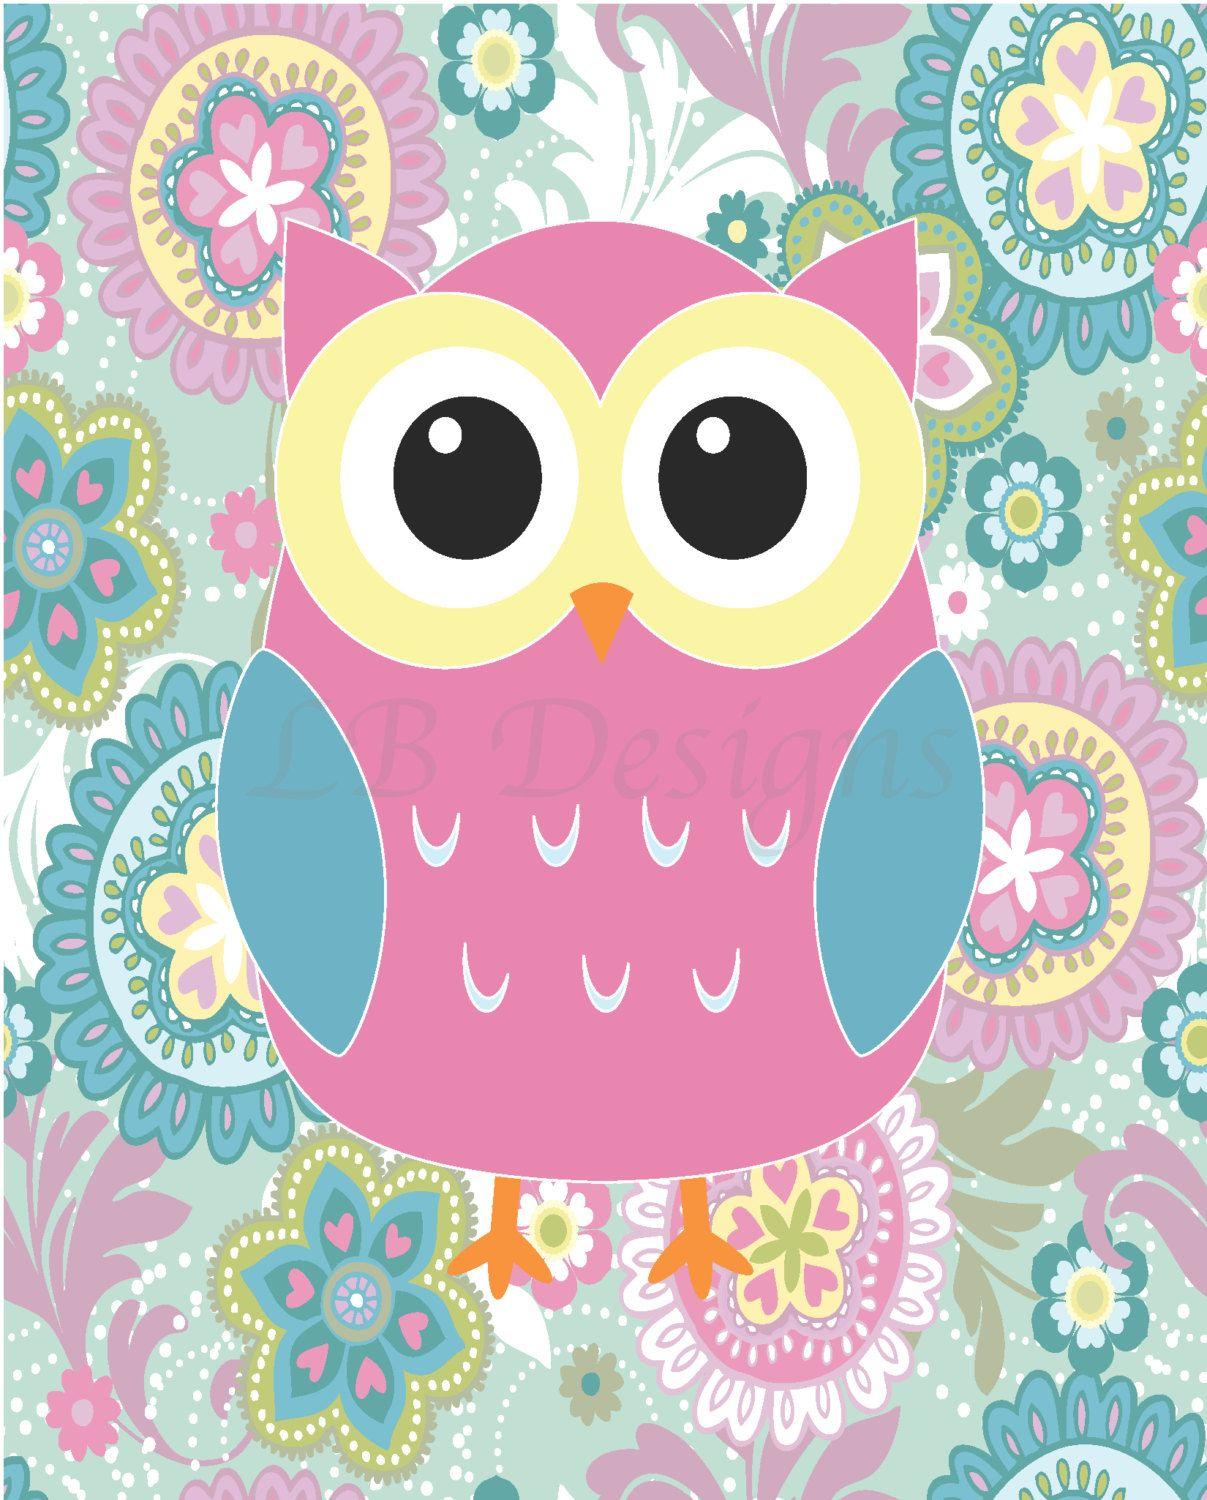 Cute Owl Tumblr Wallpapers For Iphone - Wallpaper Cave